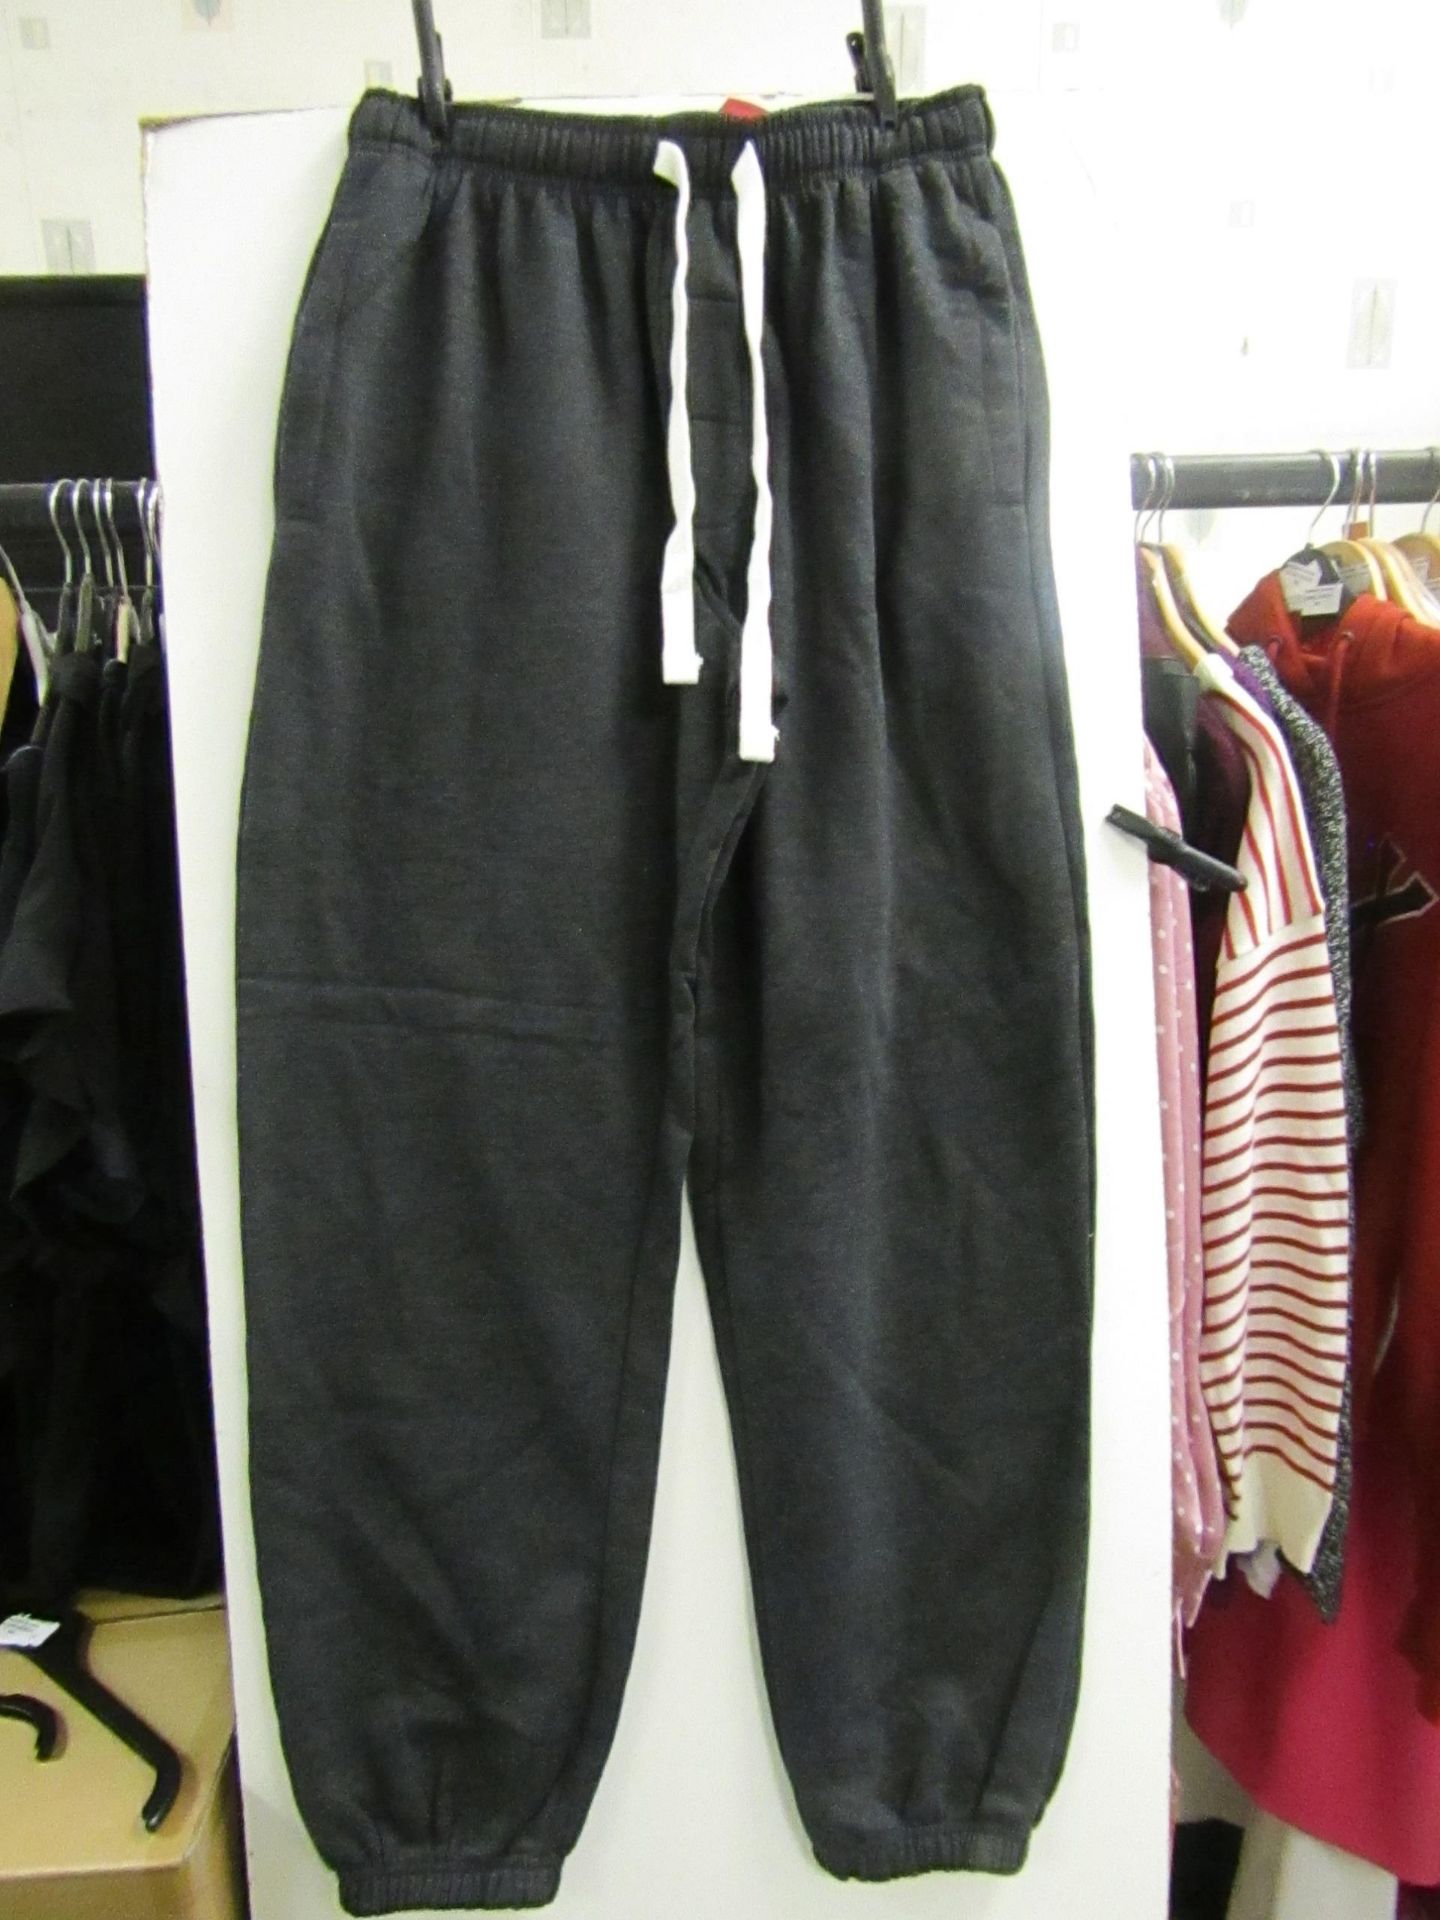 Redtag sportswear jogging pants, size M, new with tags.